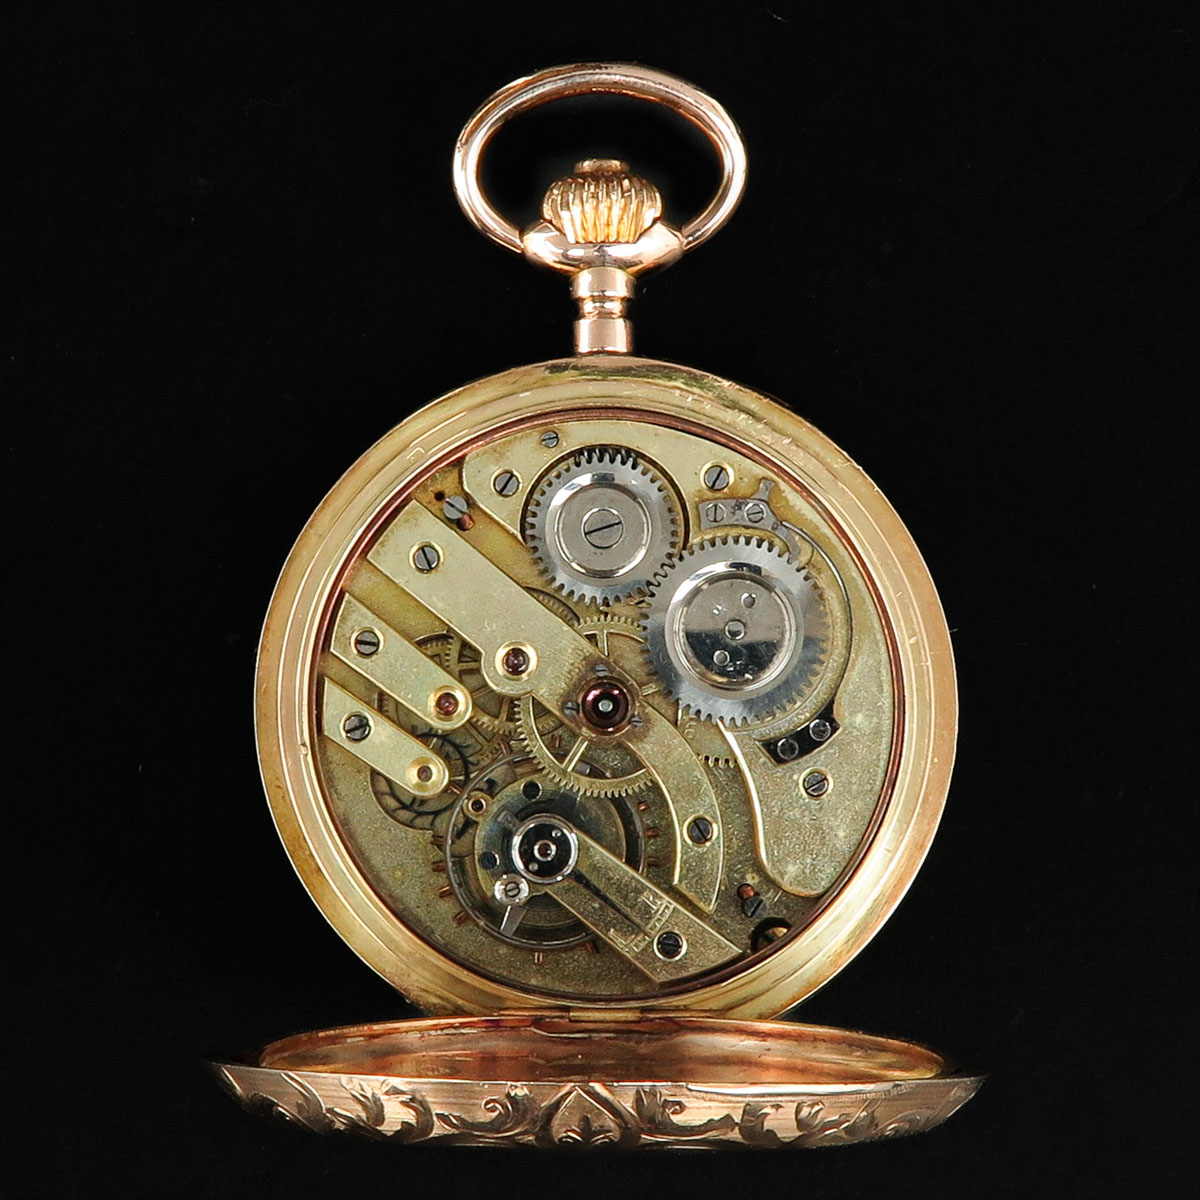 A 14k Gold Pocket Watch - Image 4 of 8